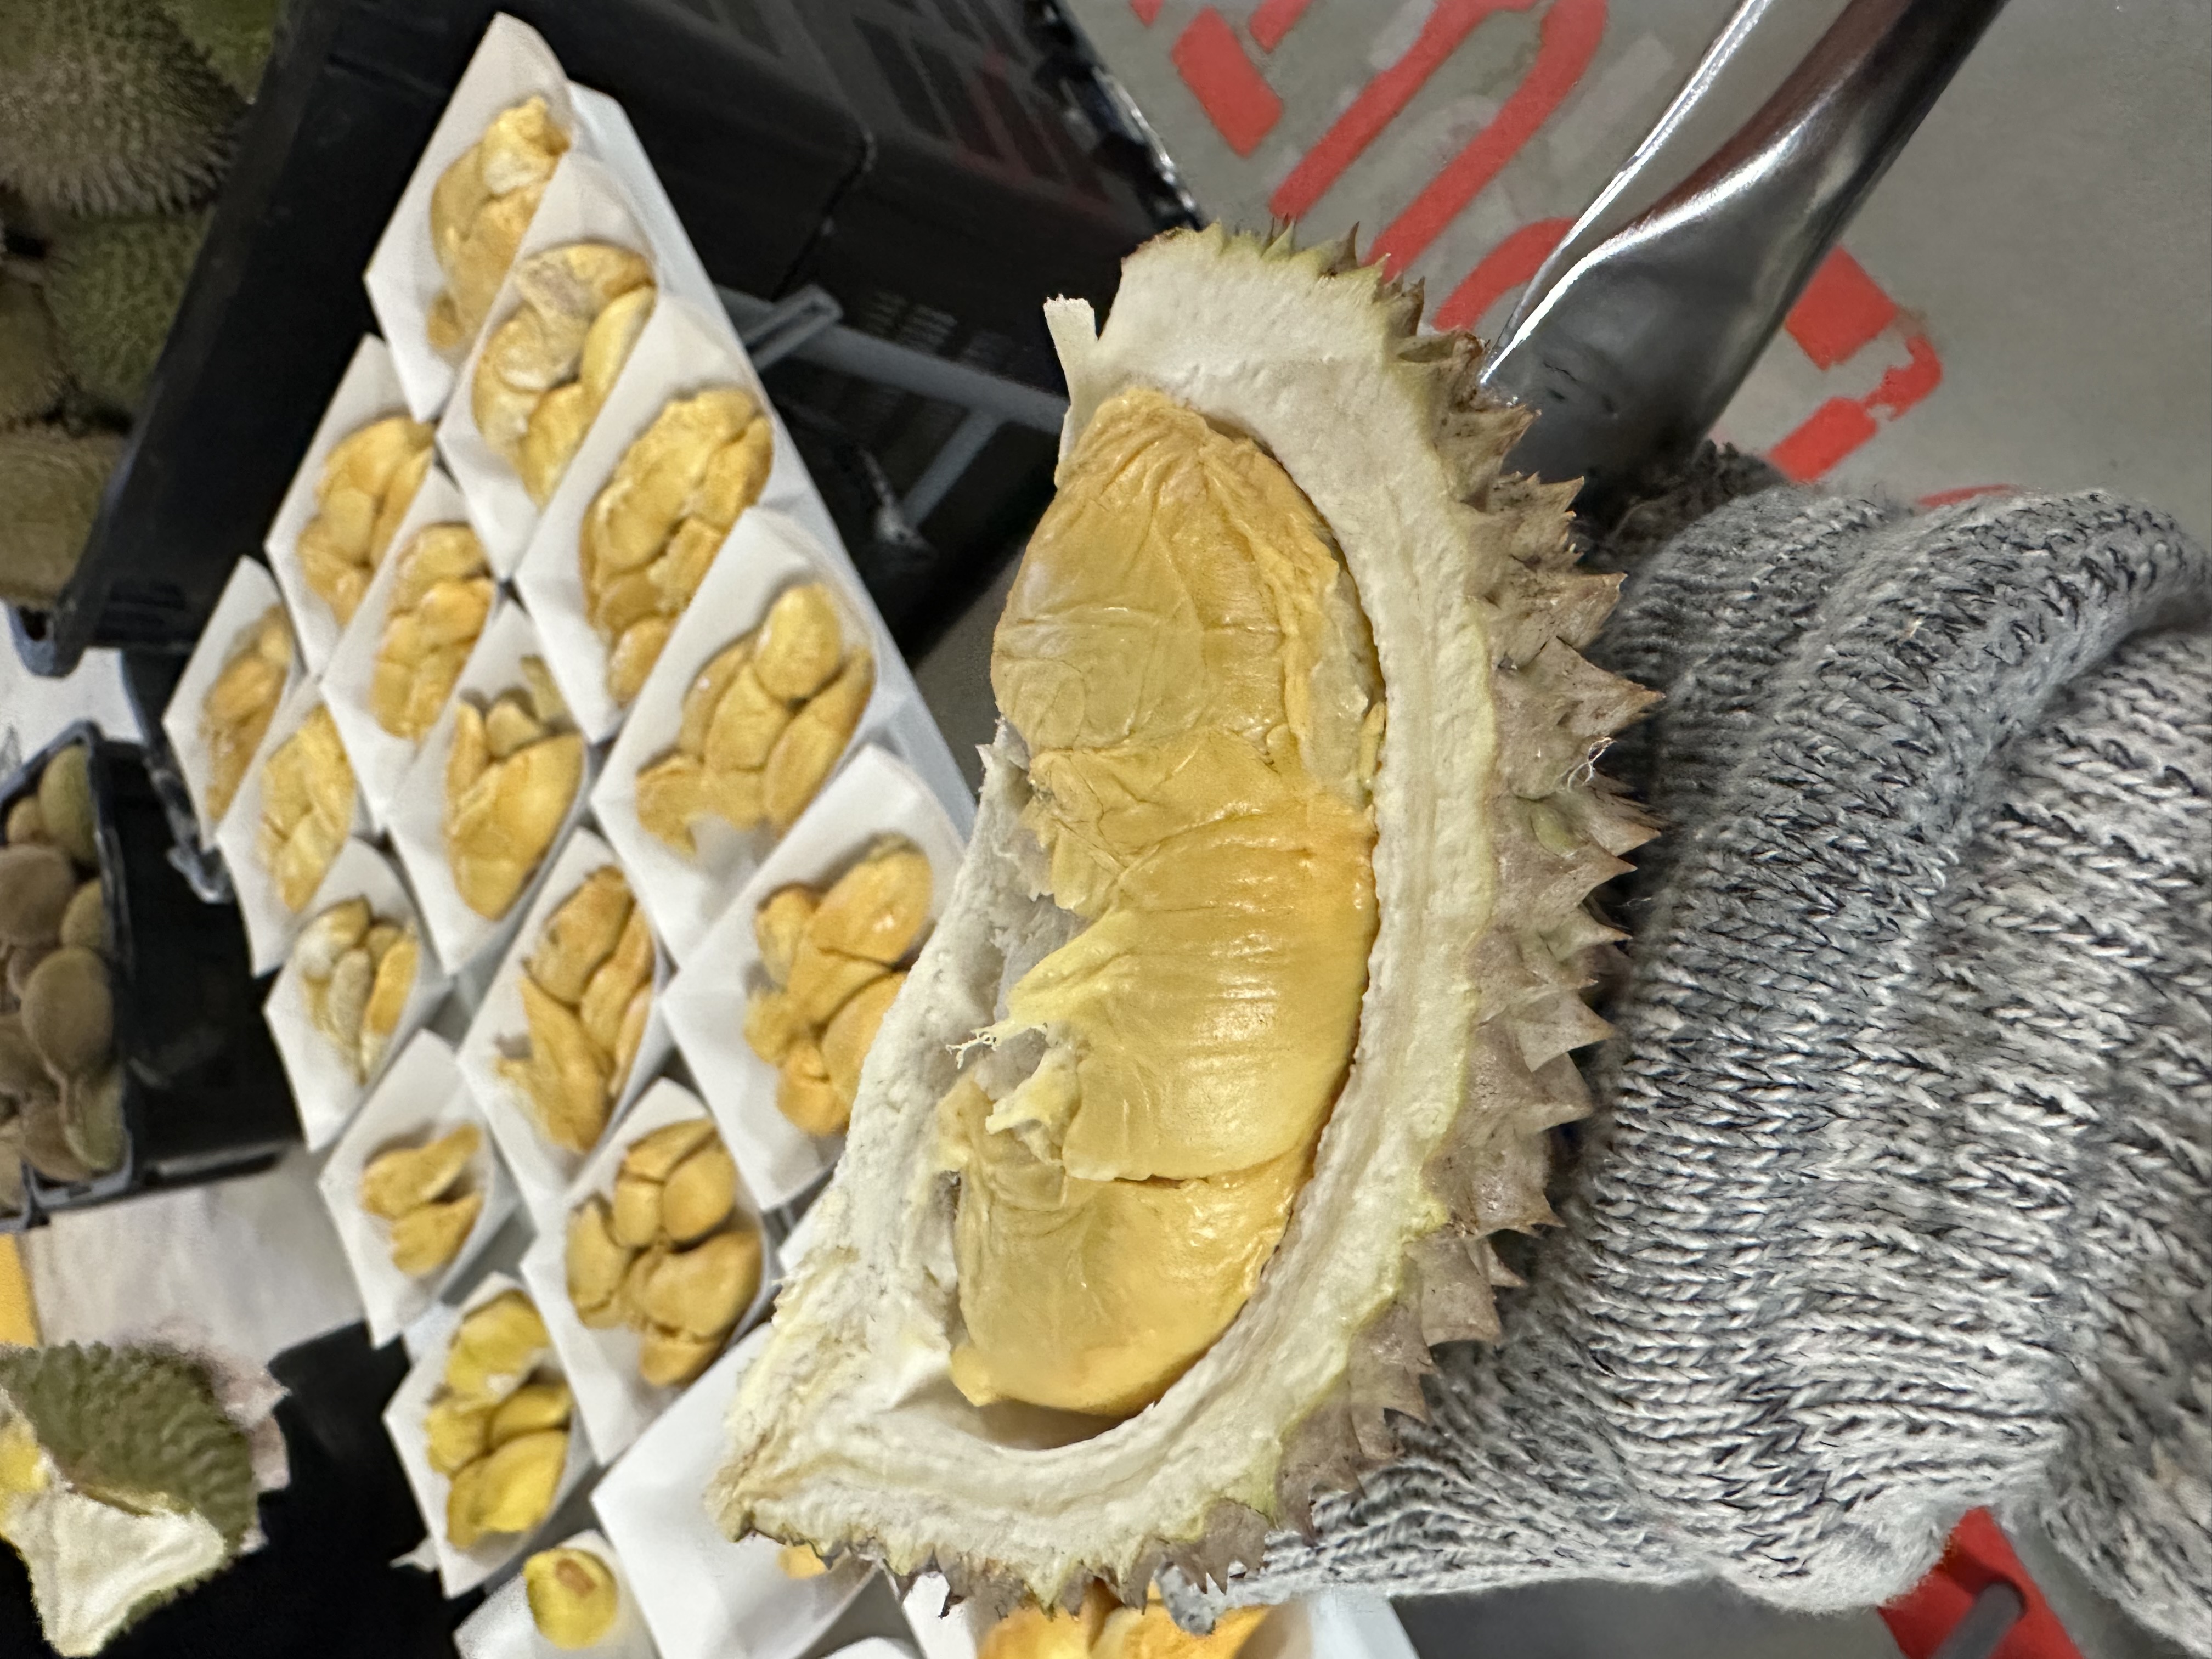 Corporate Durian Party 